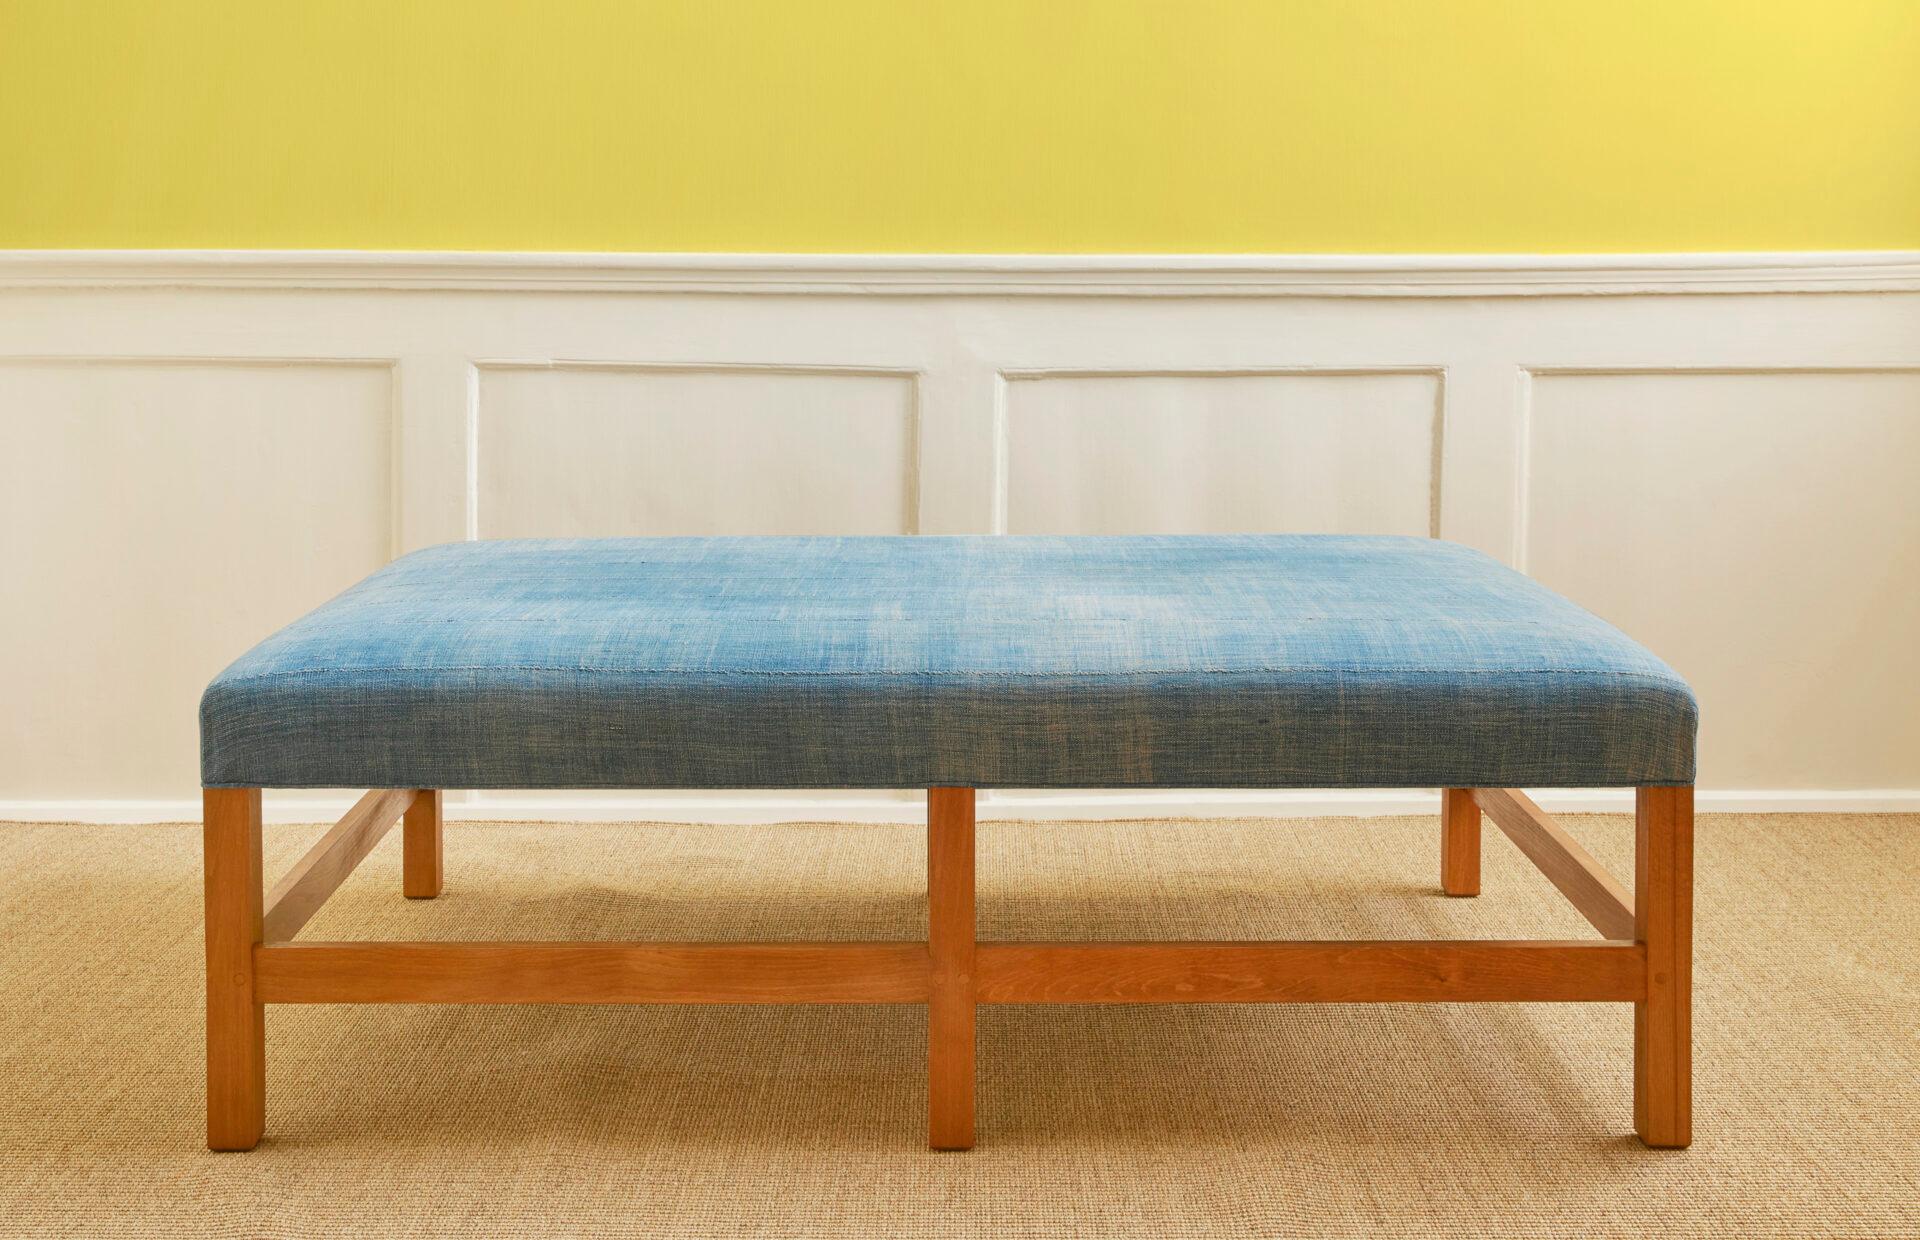 Belgium, Contemporary

Large stool / coffee table in vintage african textile upholstery by The Apartment.

H 43 x W 130 x D 80 cm